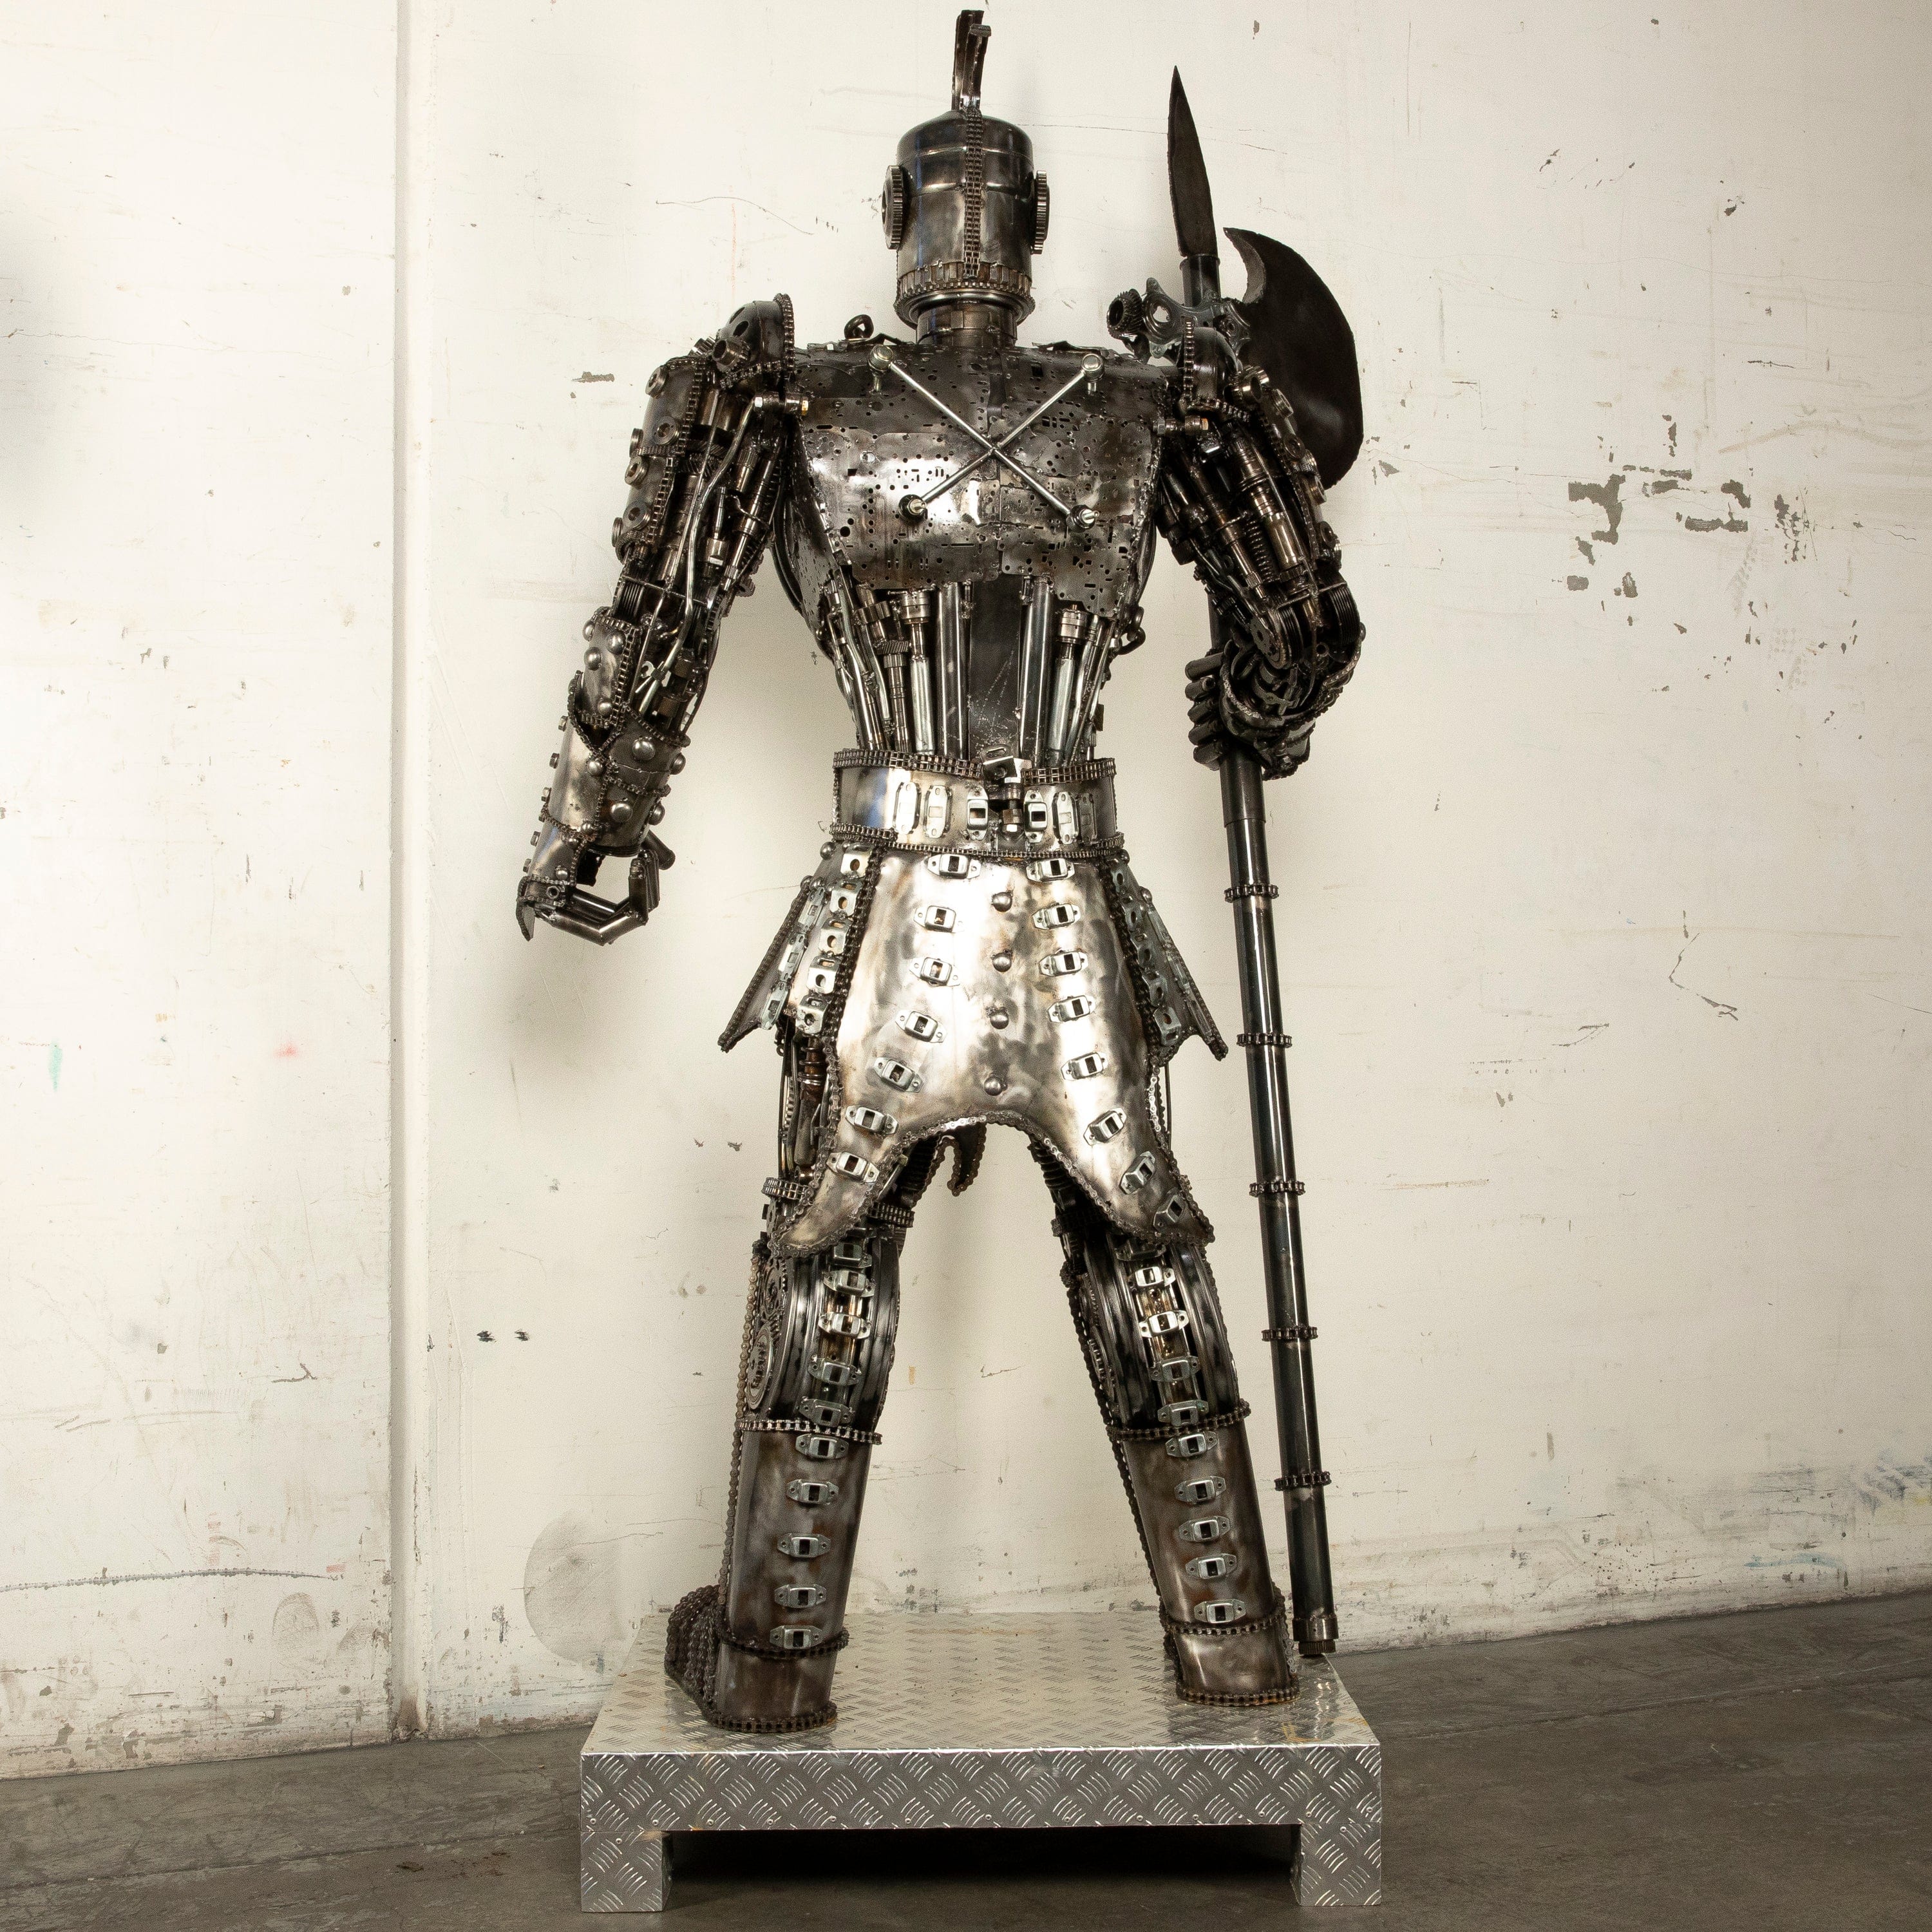 Kalifano Recycled Metal Art 79" Knight Inspired Recycled Metal Art Sculpture RMS-KN200-S02